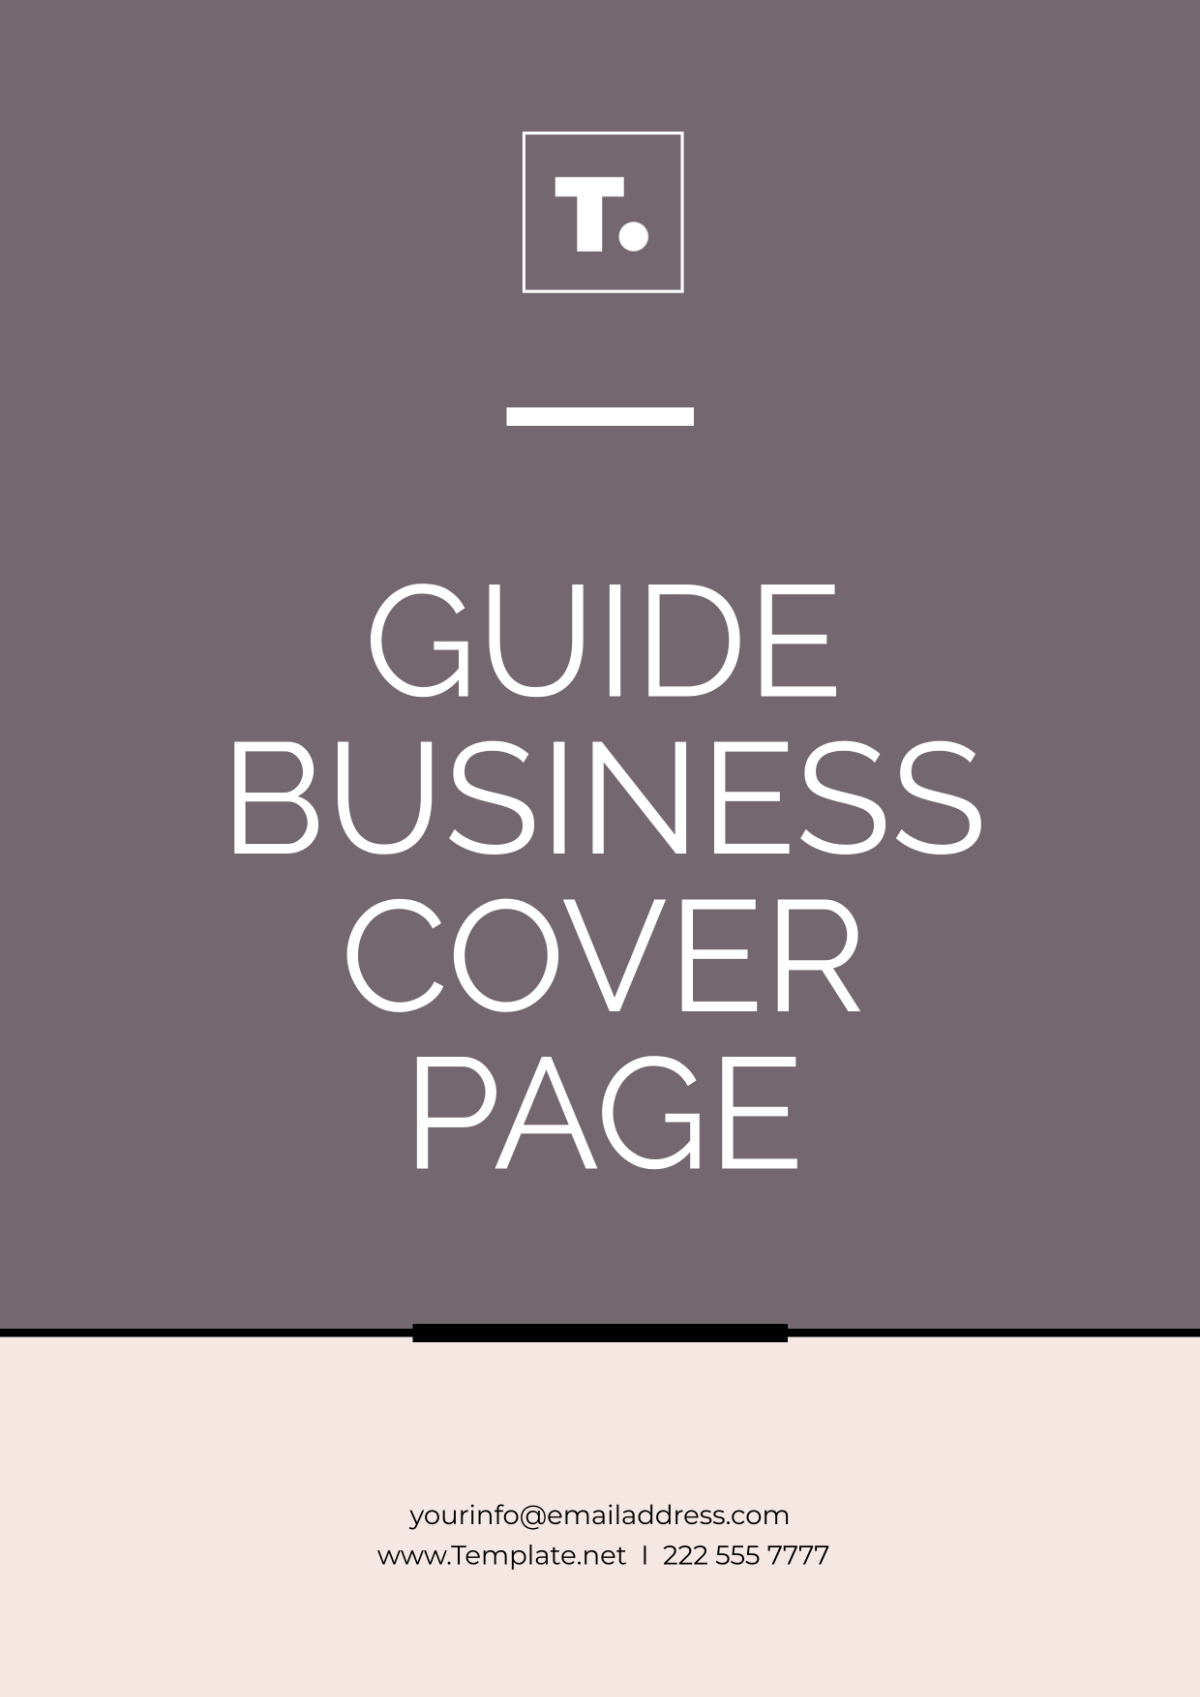 Guide Business Cover Page Template